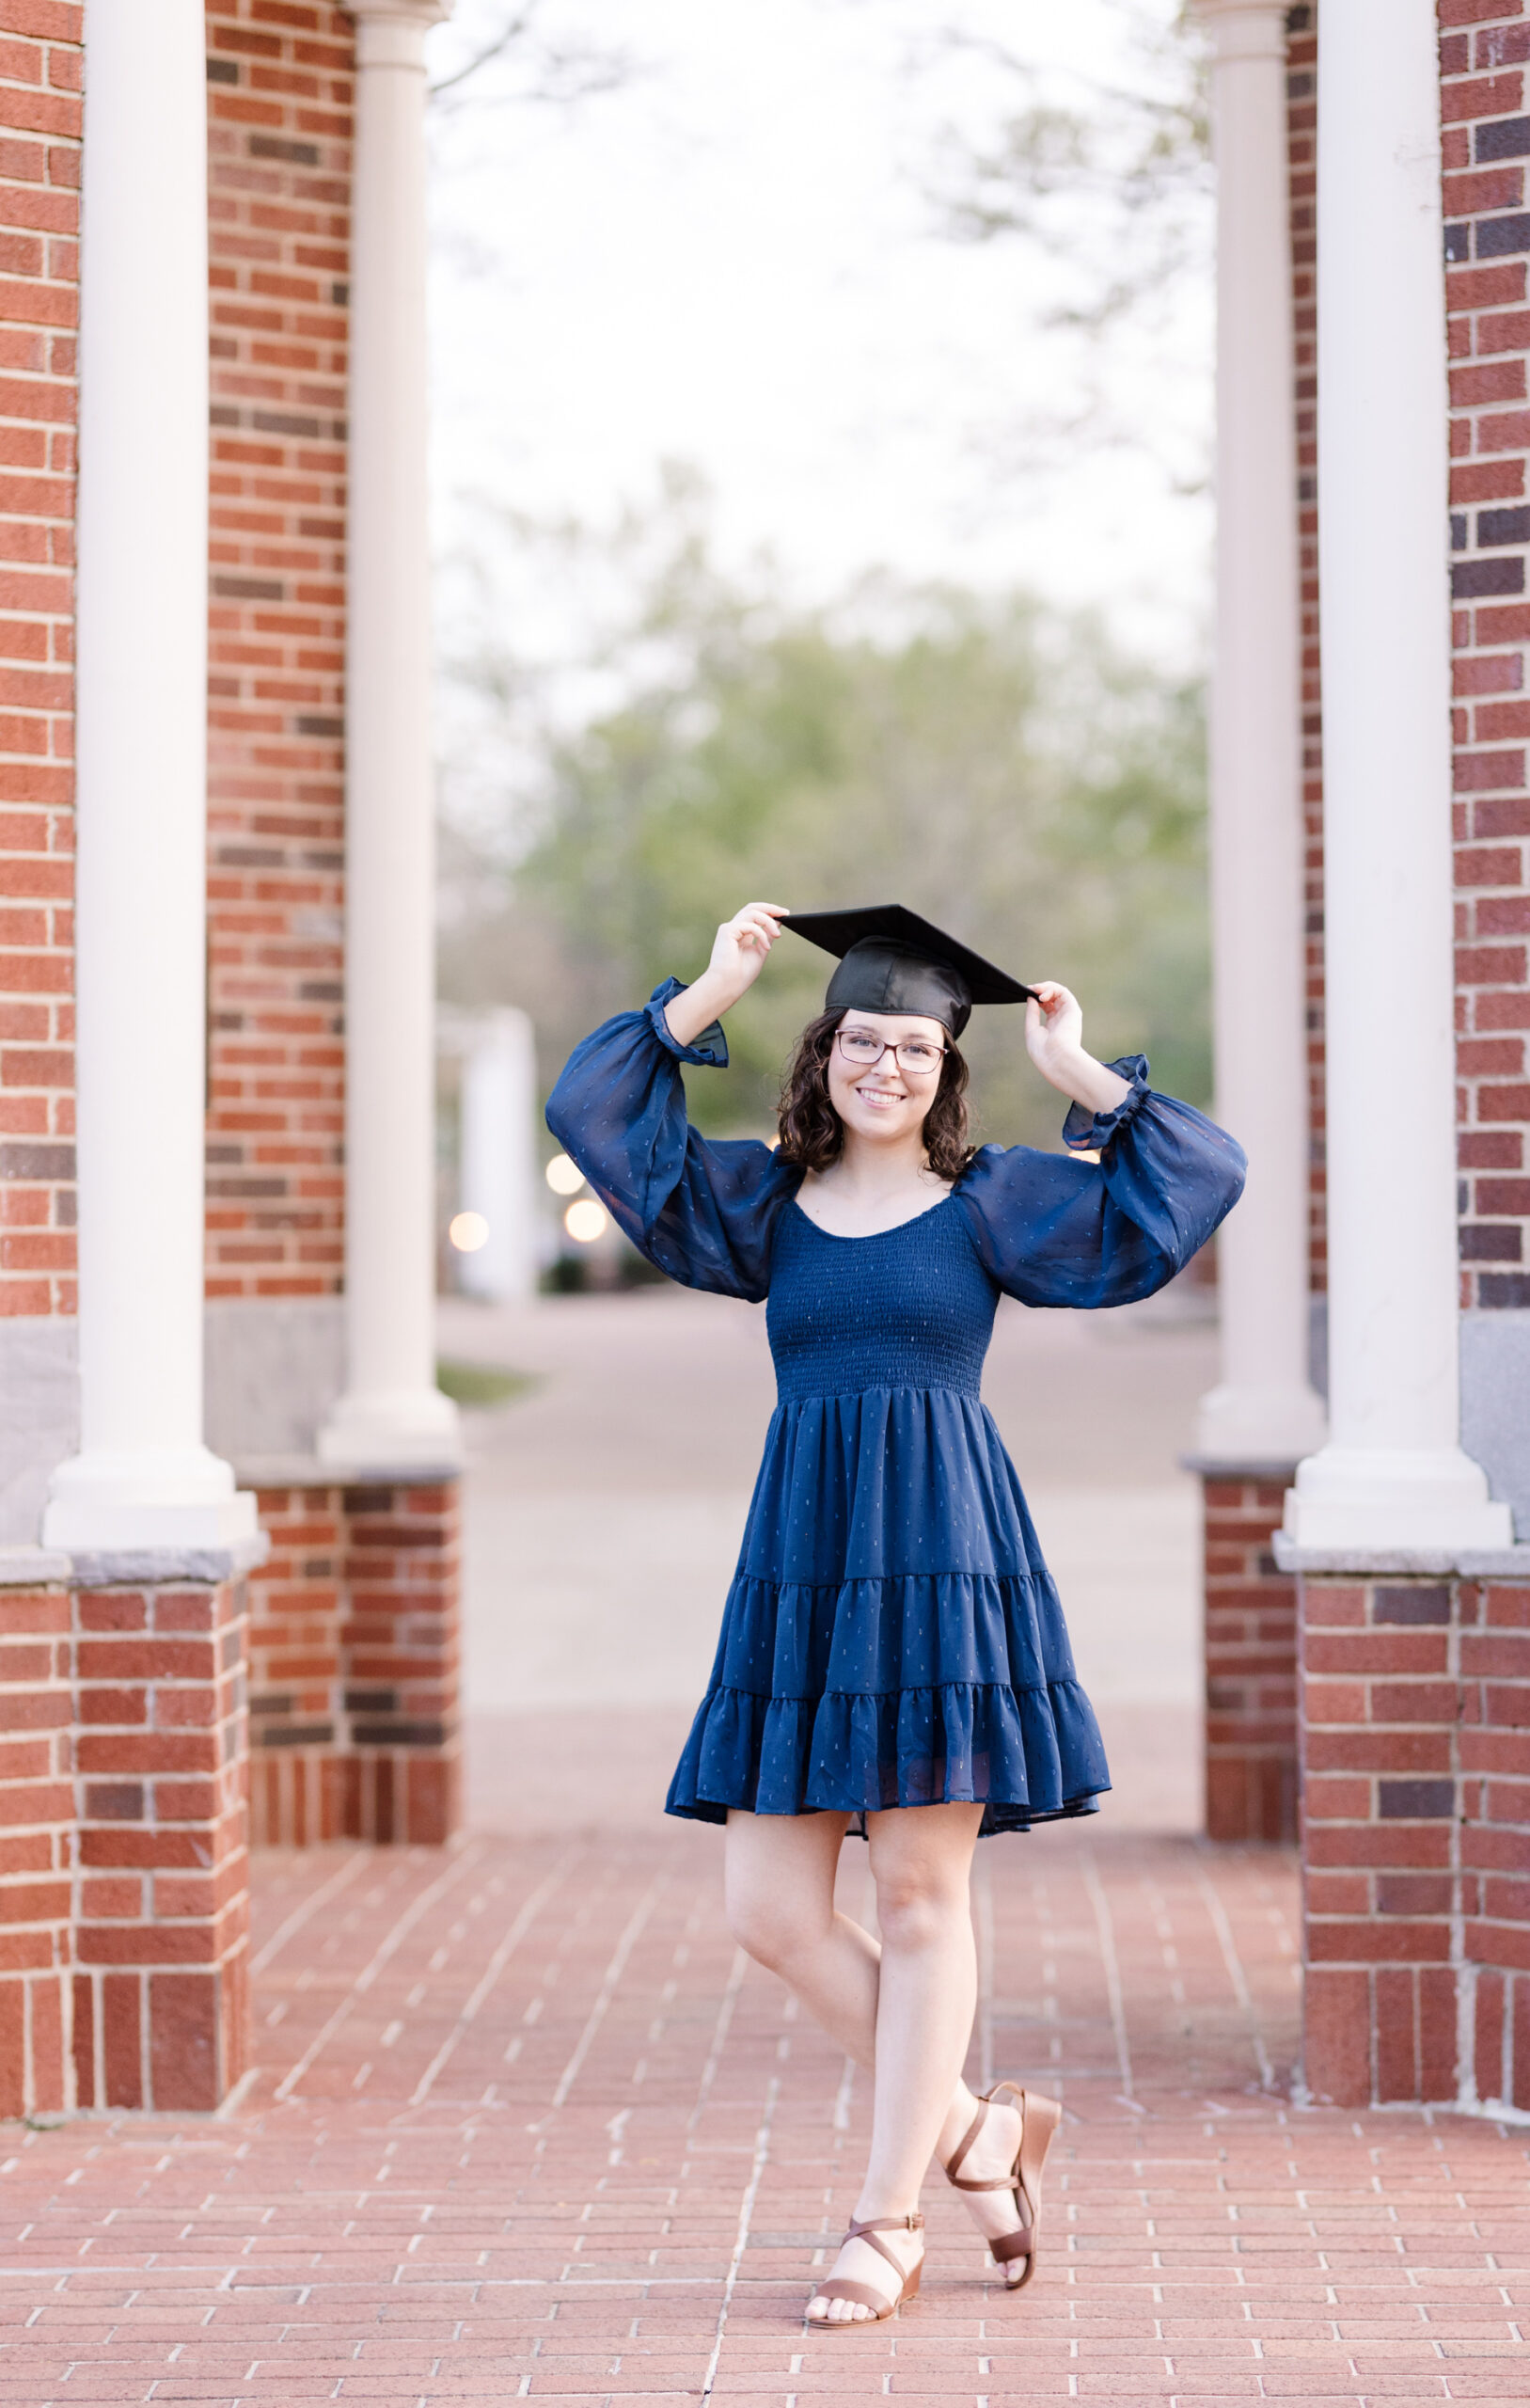 senior holding her cap and wearing a blue dress